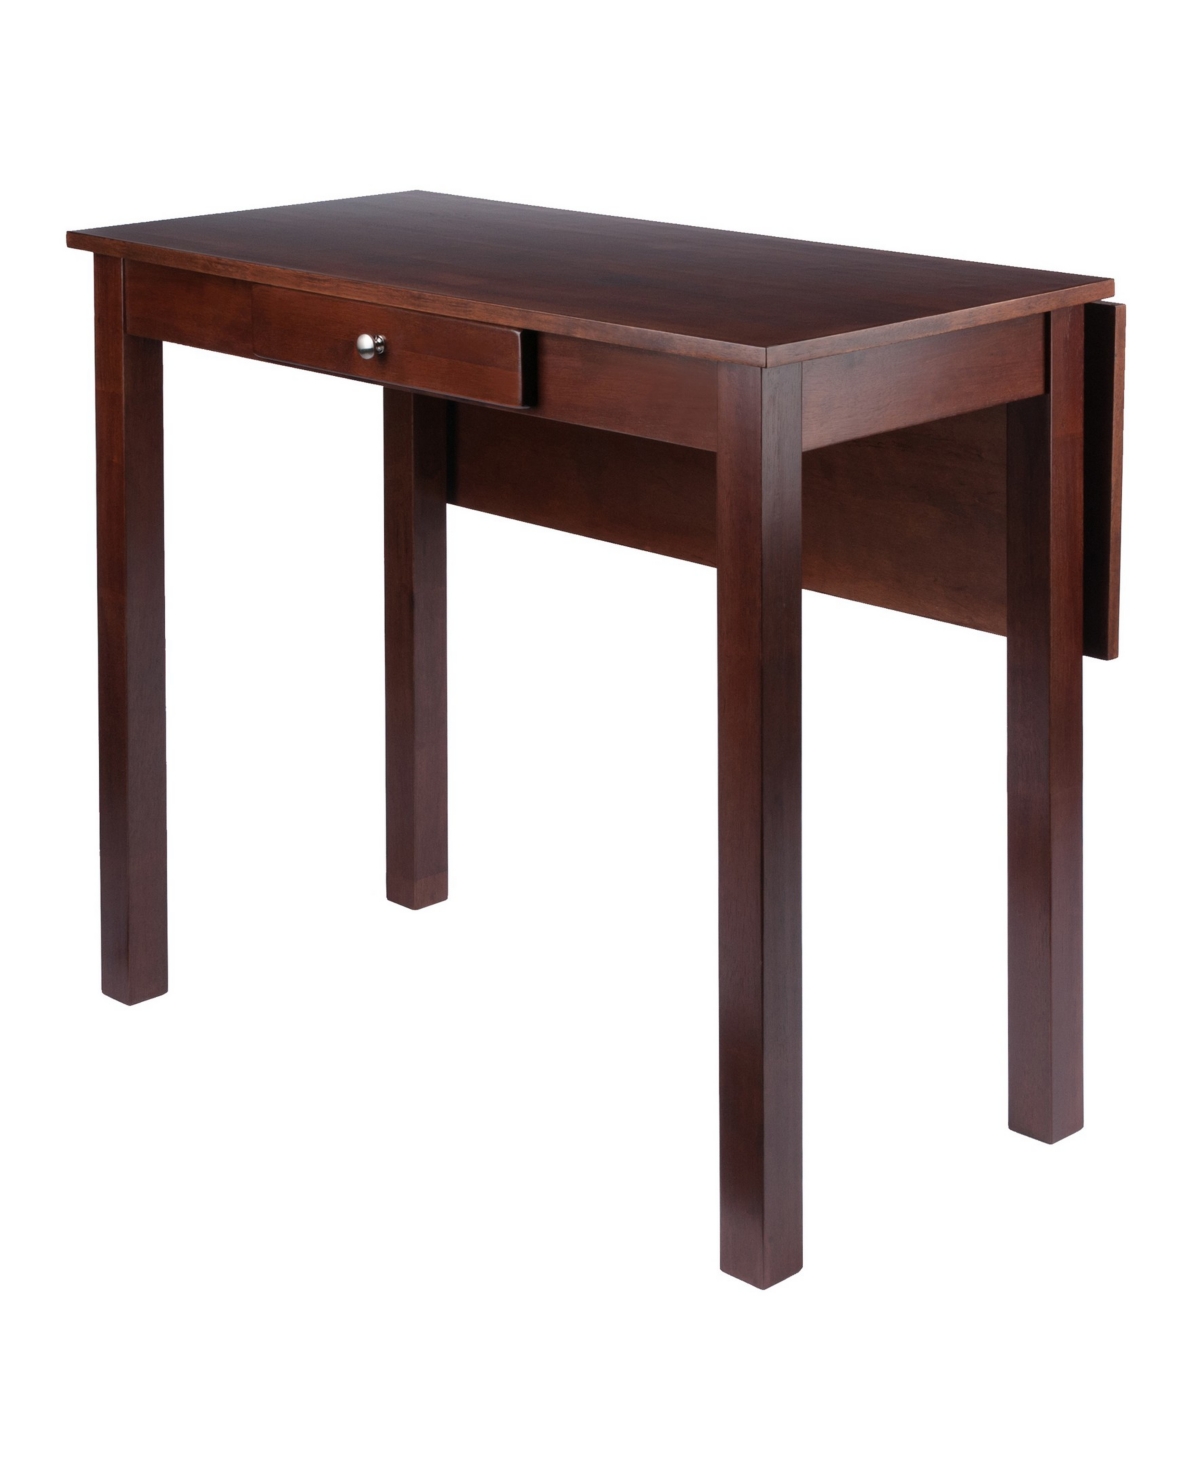 Winsome Perrone 34.06" Wood High Table With Drop Leaf In Walnut